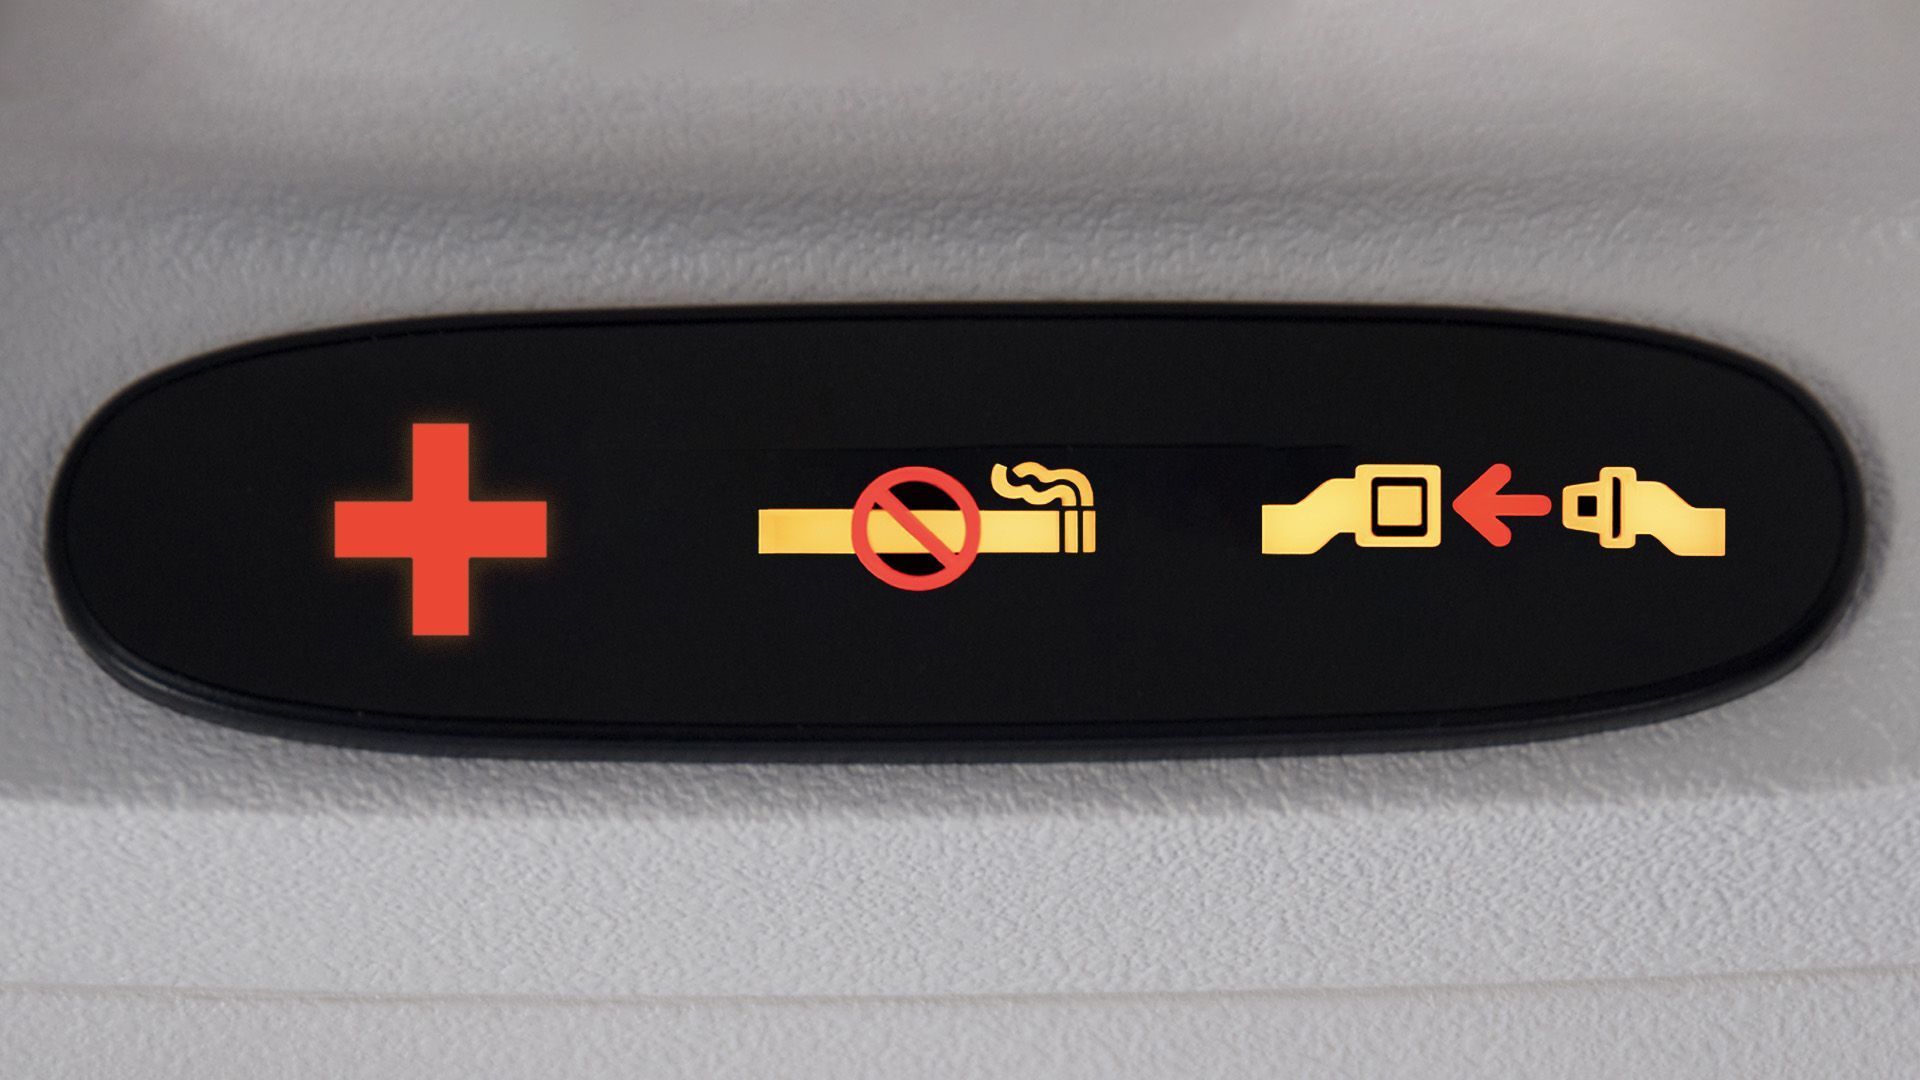 Illustration of plane seatbelt and no smoking lights with a lit up red plus